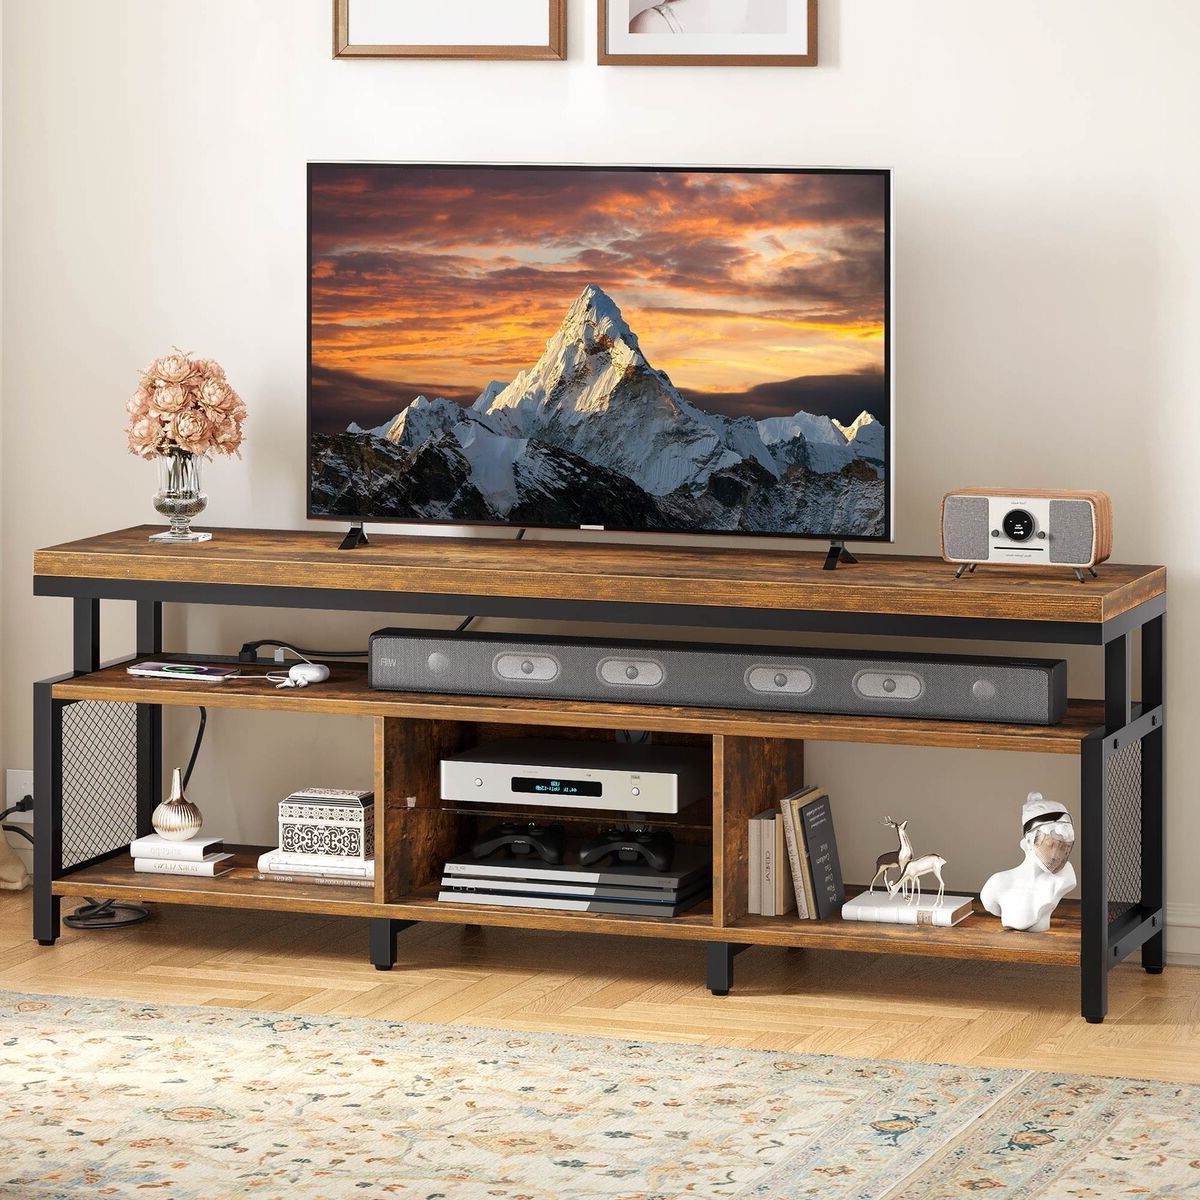 Industrial Led Tv Stand With Power Outlet Media Console For 50/60/65/70" Tvs  | Ebay Intended For Led Tv Stands With Outlet (View 9 of 20)